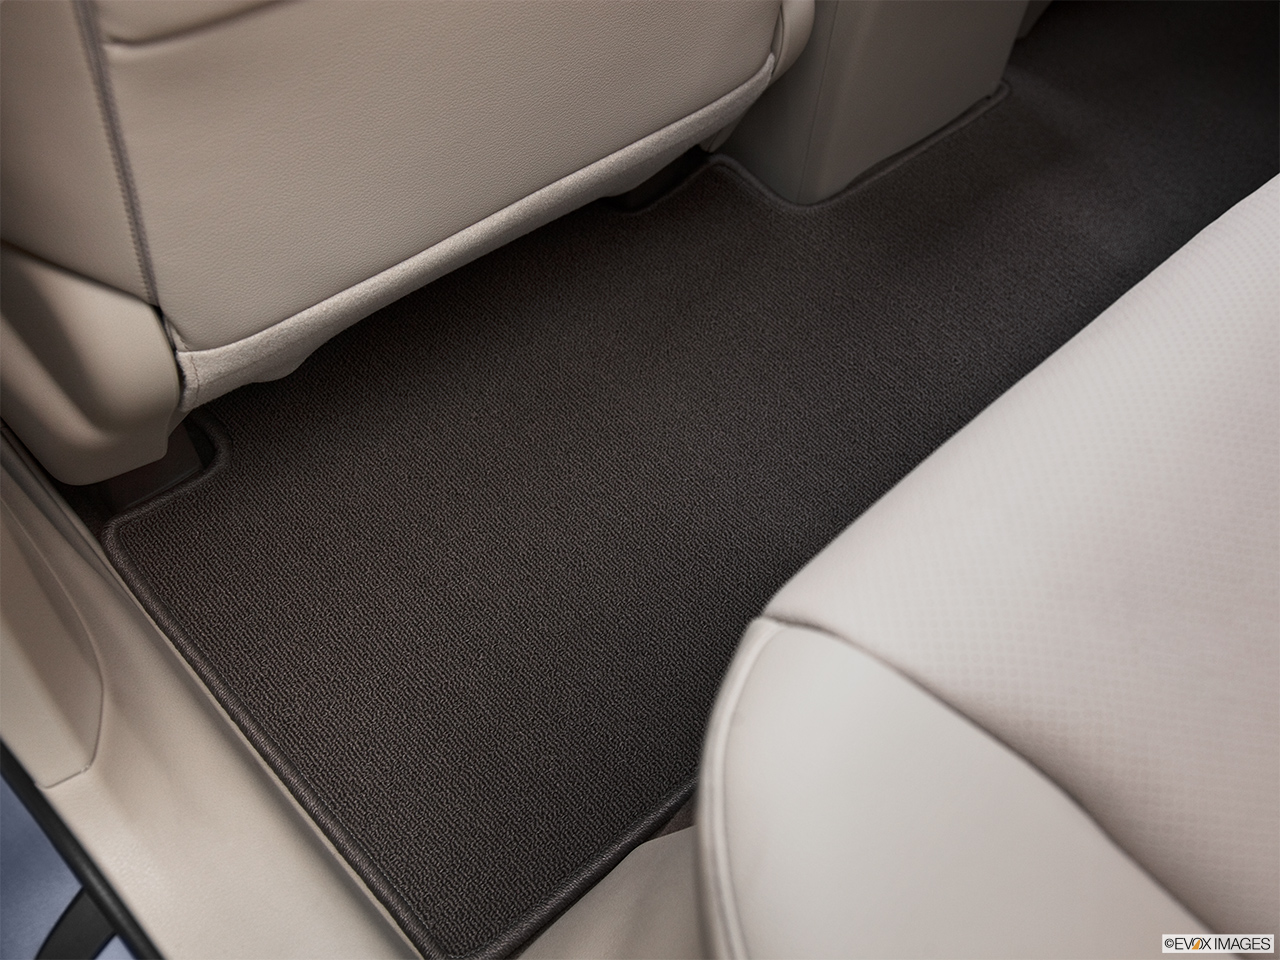 2013 Acura RDX Base Rear driver's side floor mat. Mid-seat level from outside looking in. 